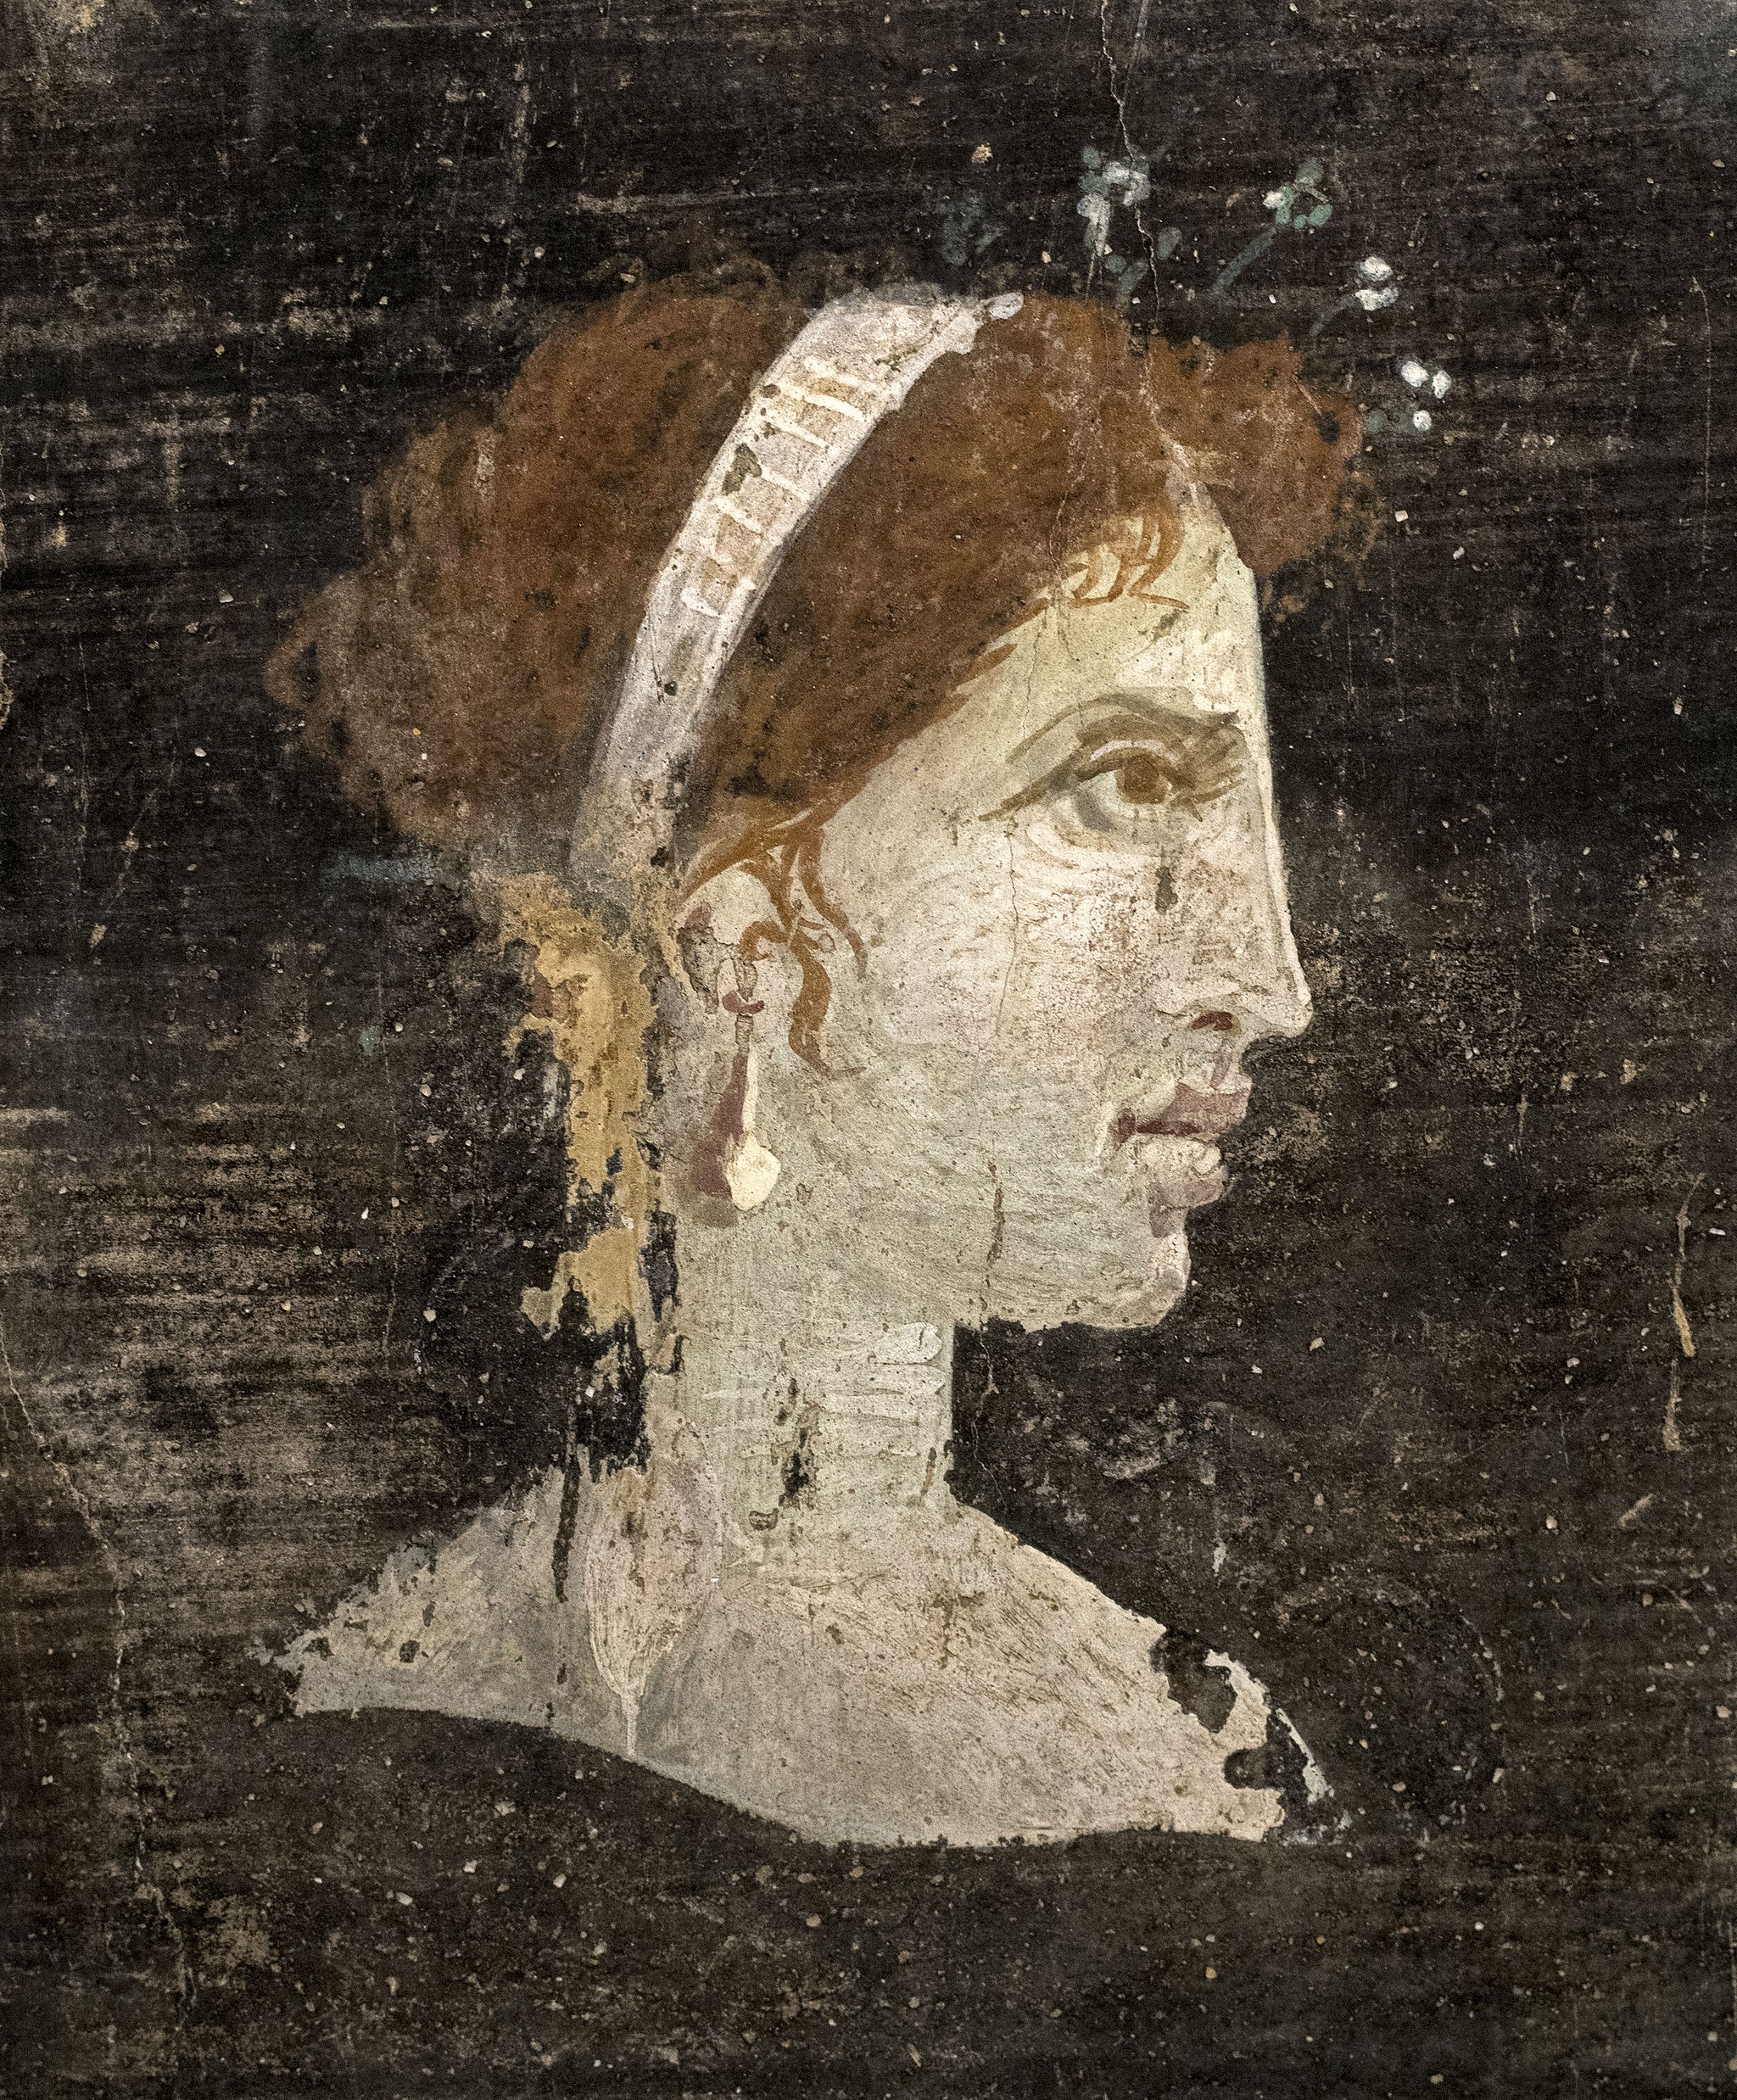 A posthumous painted portrait of Cleopatra VII of Ptolemaic Egypt from Roman Herculaneum, made during the 1st century AD, i.e. before the destruction of Herculaneum by the volcanic eruption of Mount Vesuvius by Á. M. Felicísimo via Creative Commons 2.0 License